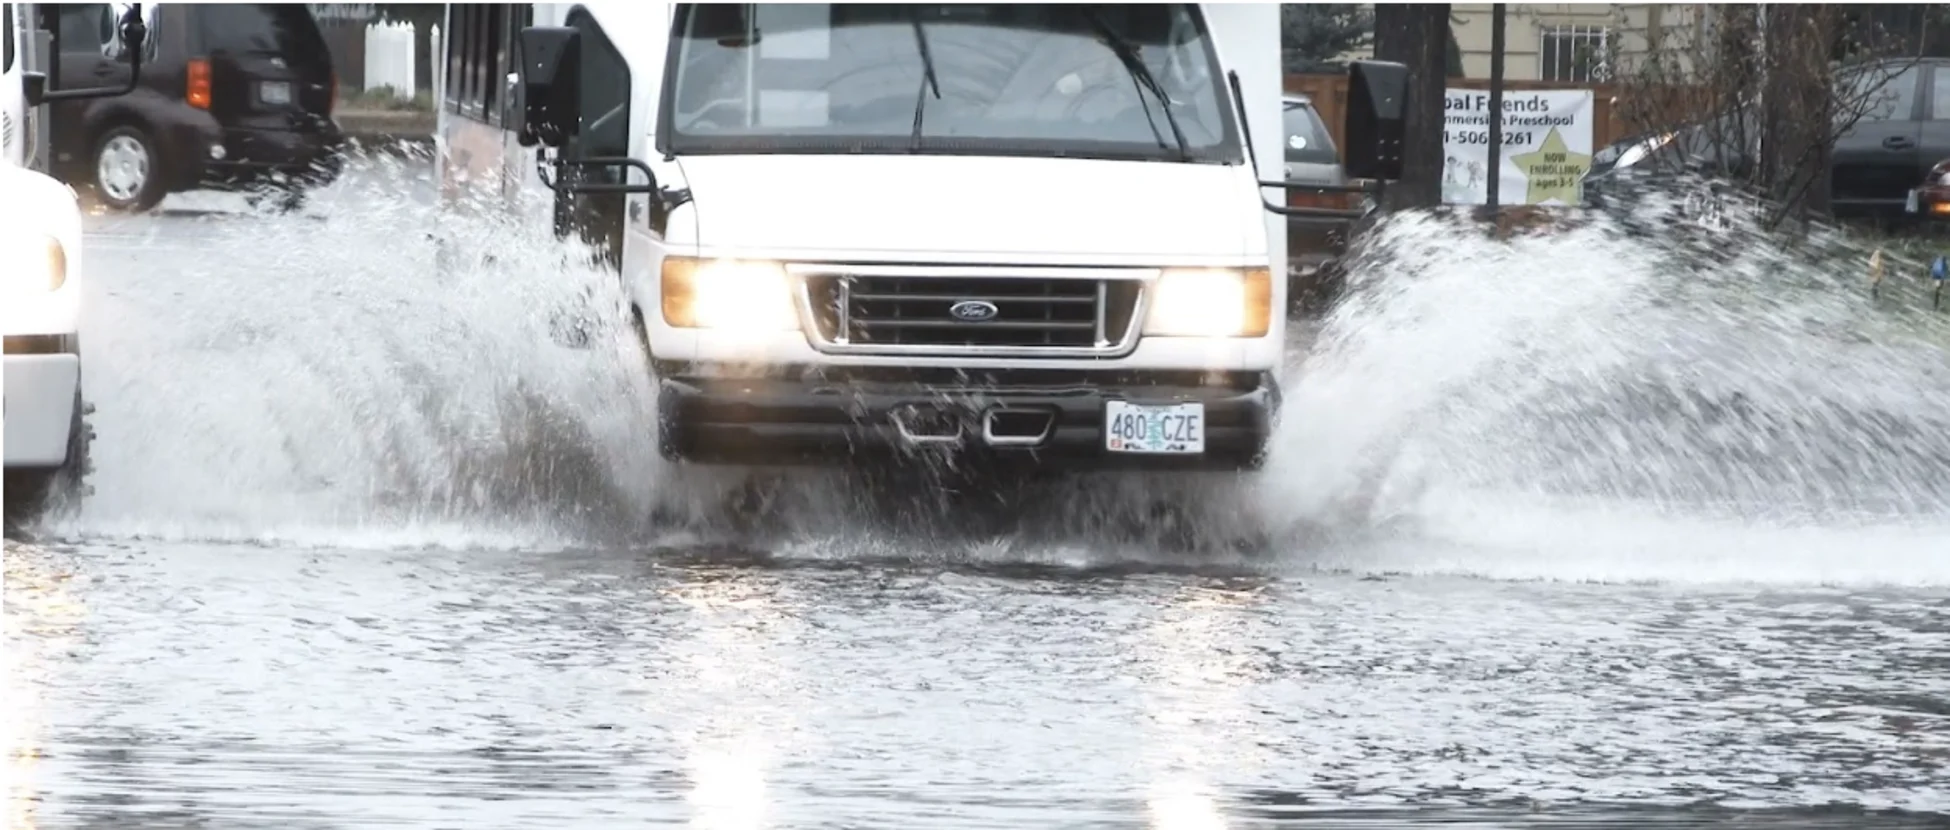 Why some roadways are designed to flood during storms